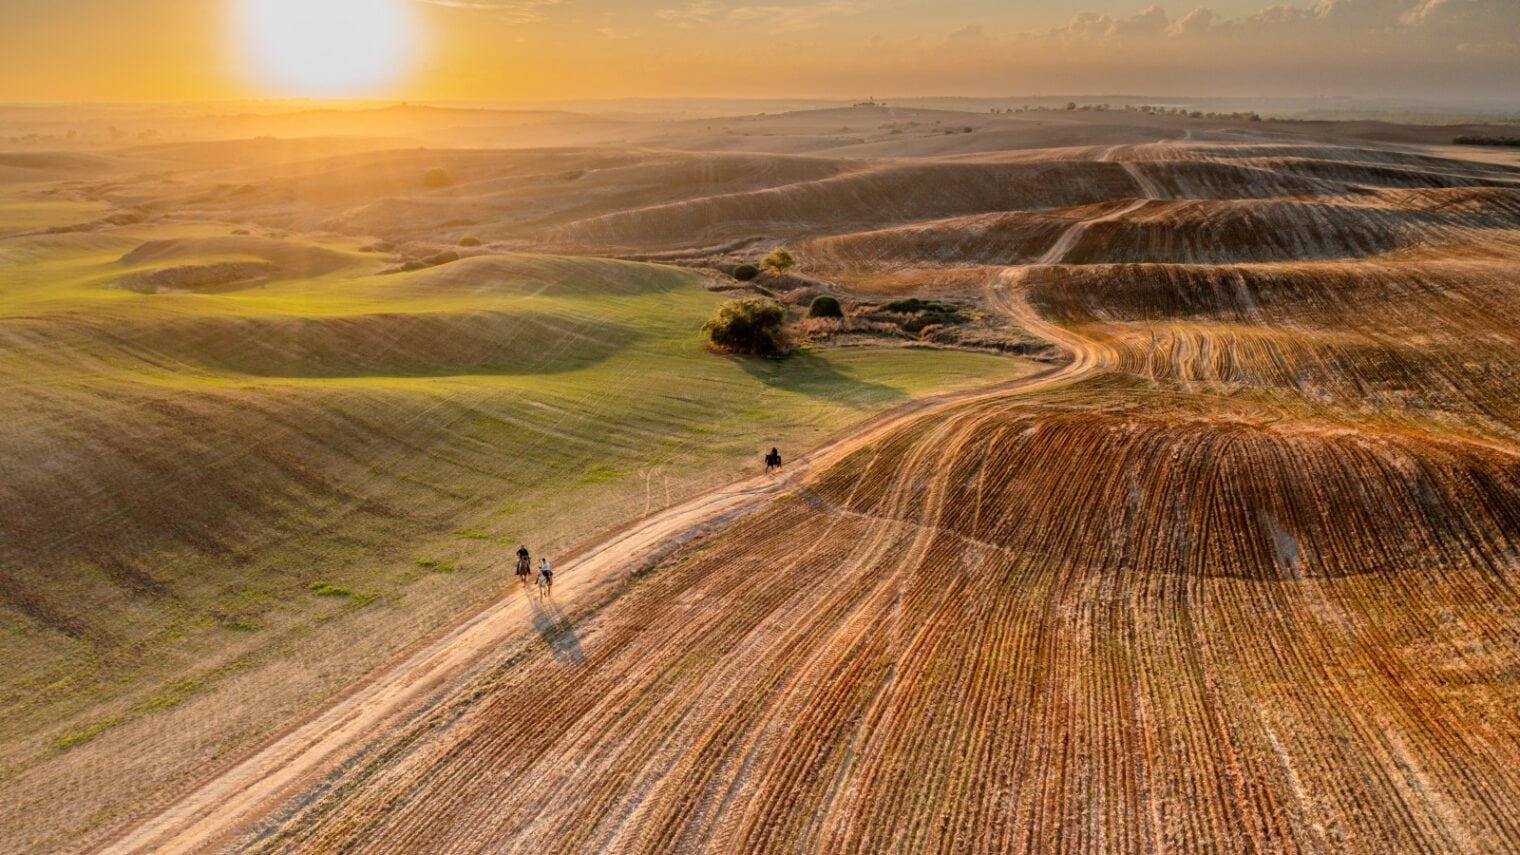 The open fields of the Western Negev before October 7. Photo by Or Adar